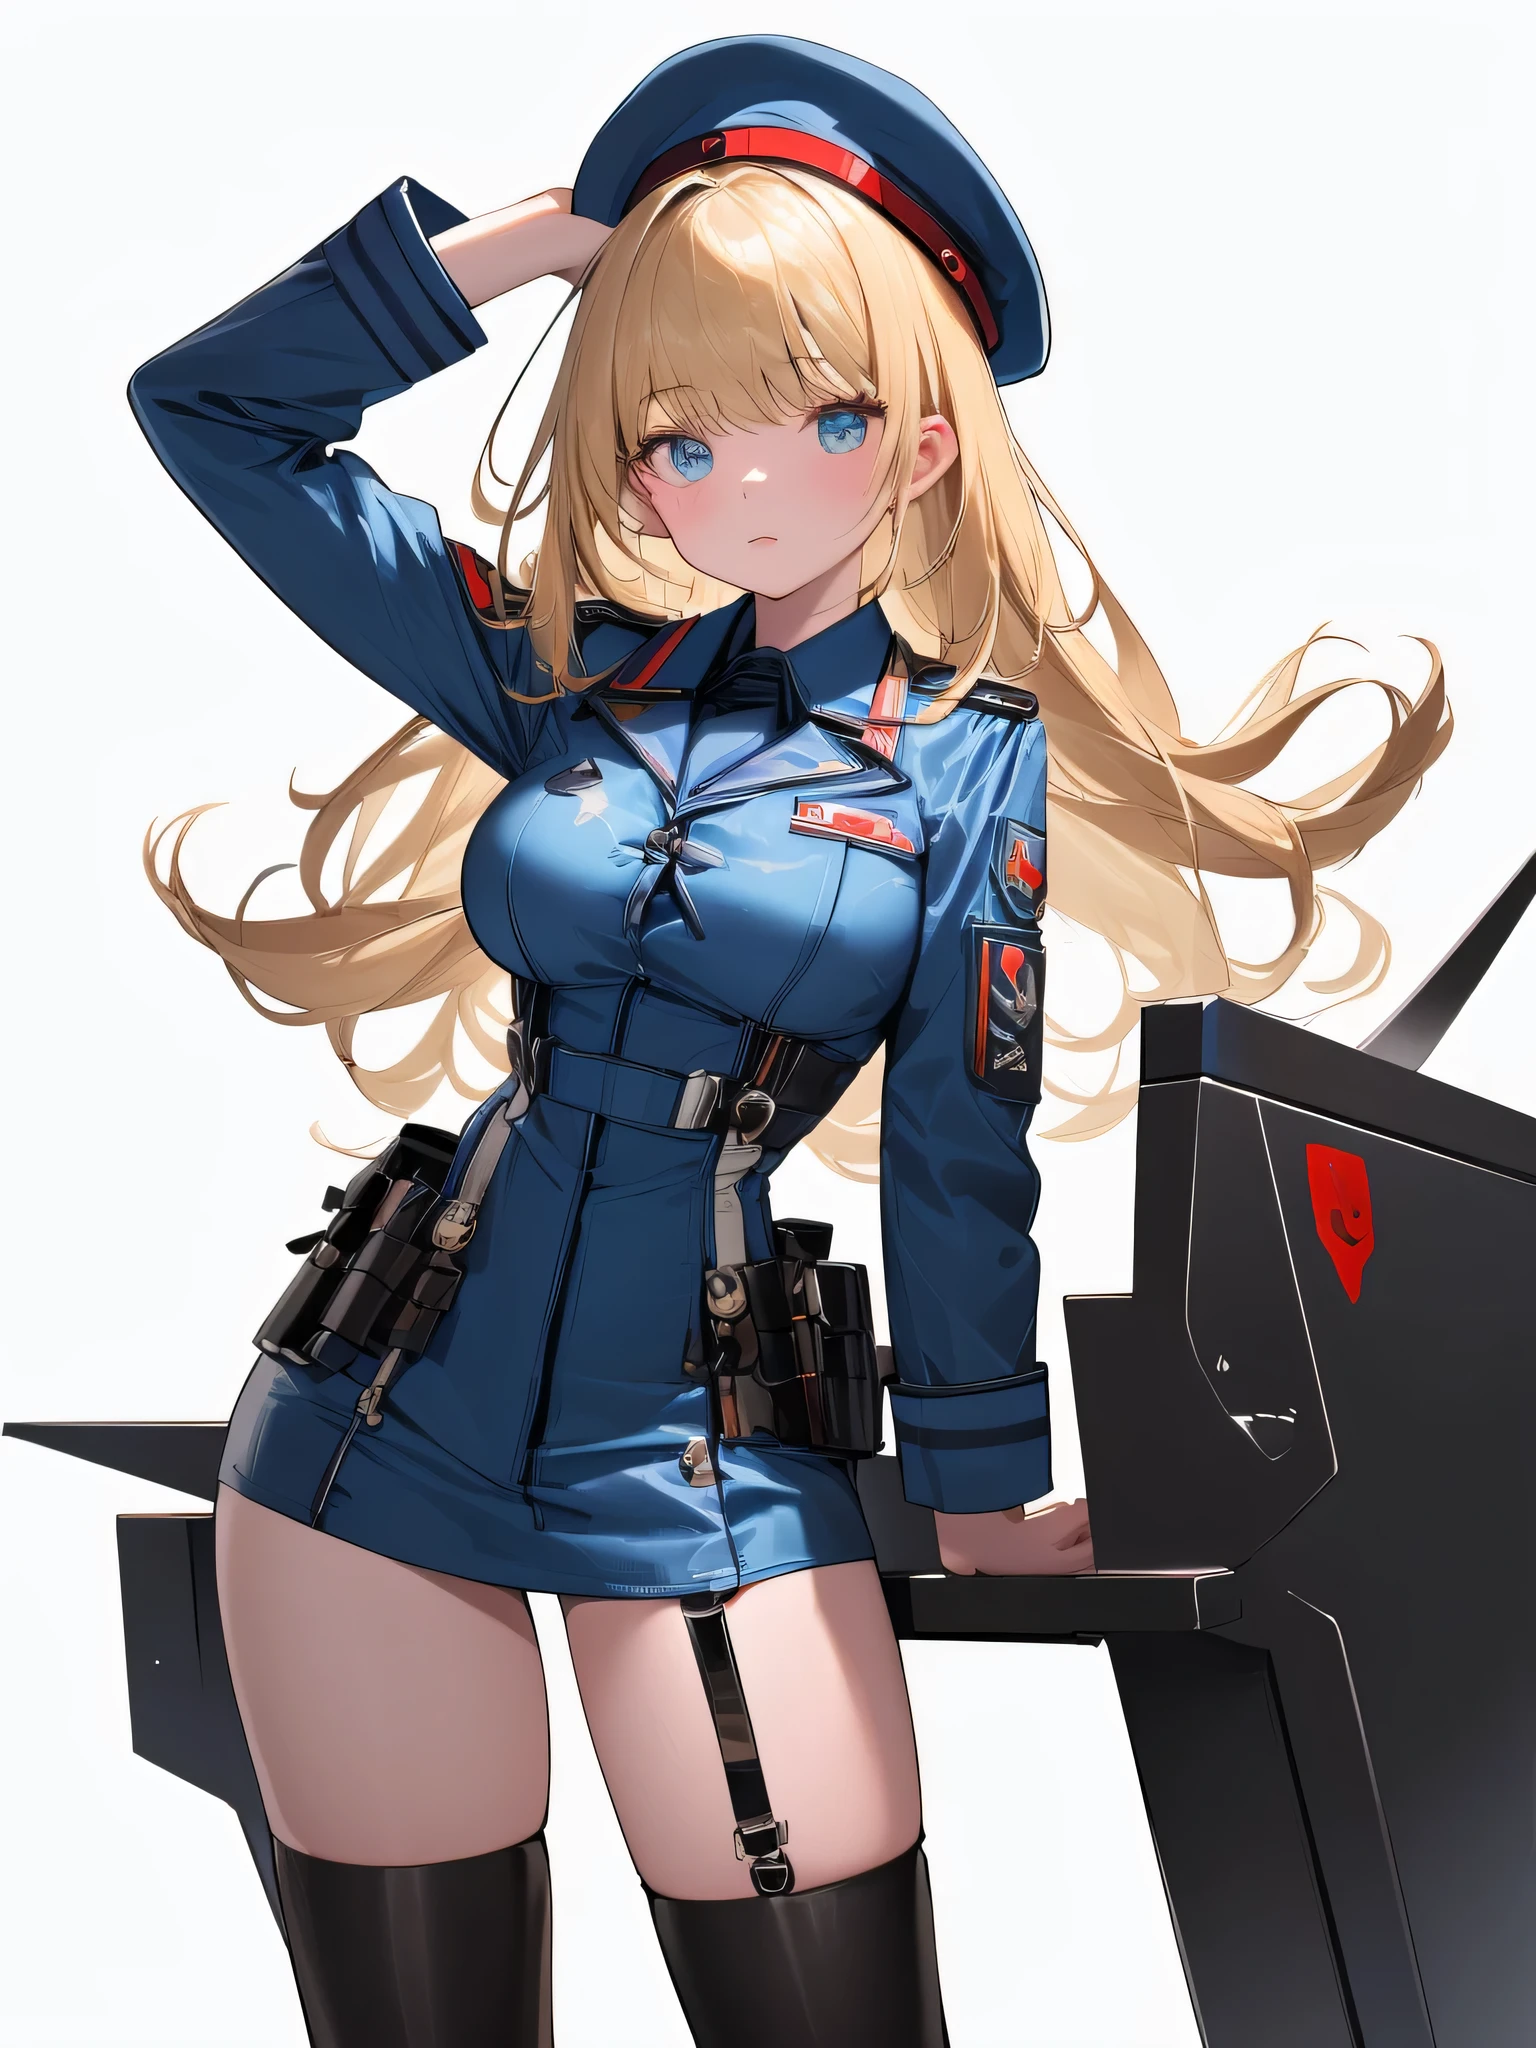 ((Best quality, 8K, Ultra-detailed, Masterpiece: 1.3)), 3 girl, Shiny skin, Sharp, Perfect body beauty, realistic shadow perfect body,("Dark grey and deep blue navy officer uniform,beret,futuristic,Transparent ":1.2),Big_Breasts ,Young girl, short girl,upper legs , indoors, White background,cleavage, standing arms down, fighter pilot harness,M legs， your ass, ("ahoge,Blonde long hair":1.5), portrait shot,(" no background,no object":2)